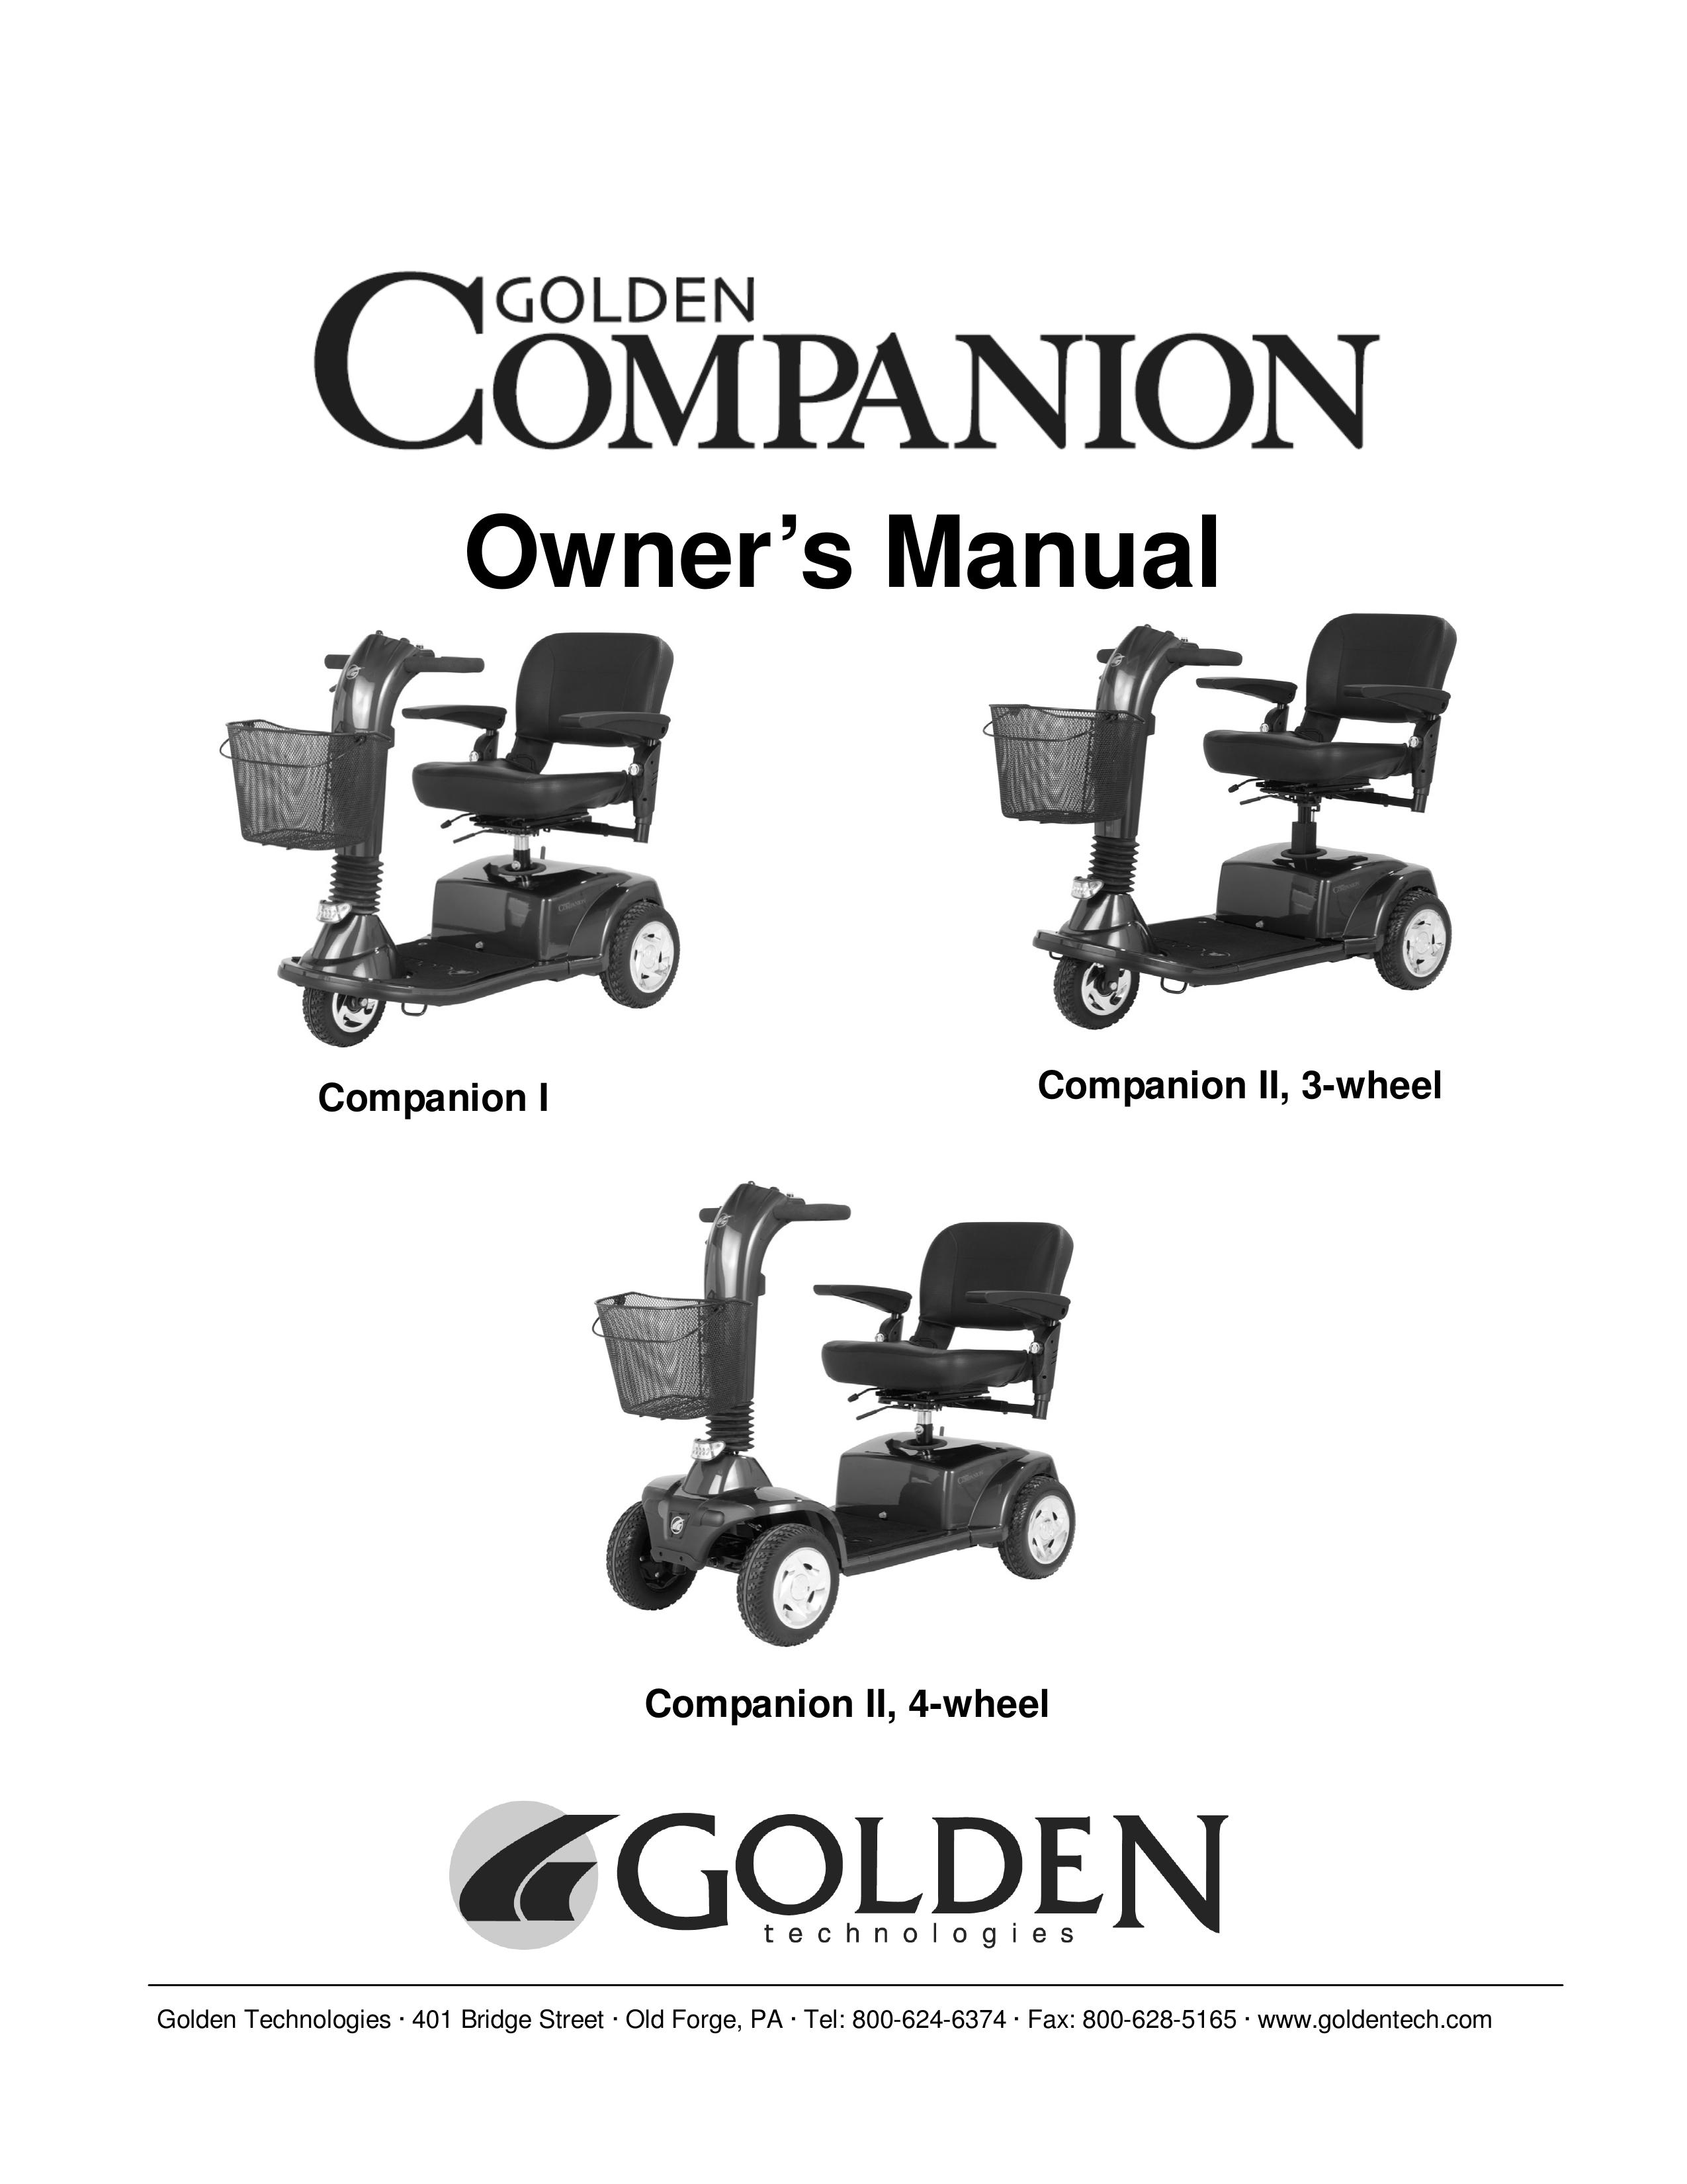 Golden Technologies GC340 Mobility Scooter User Manual